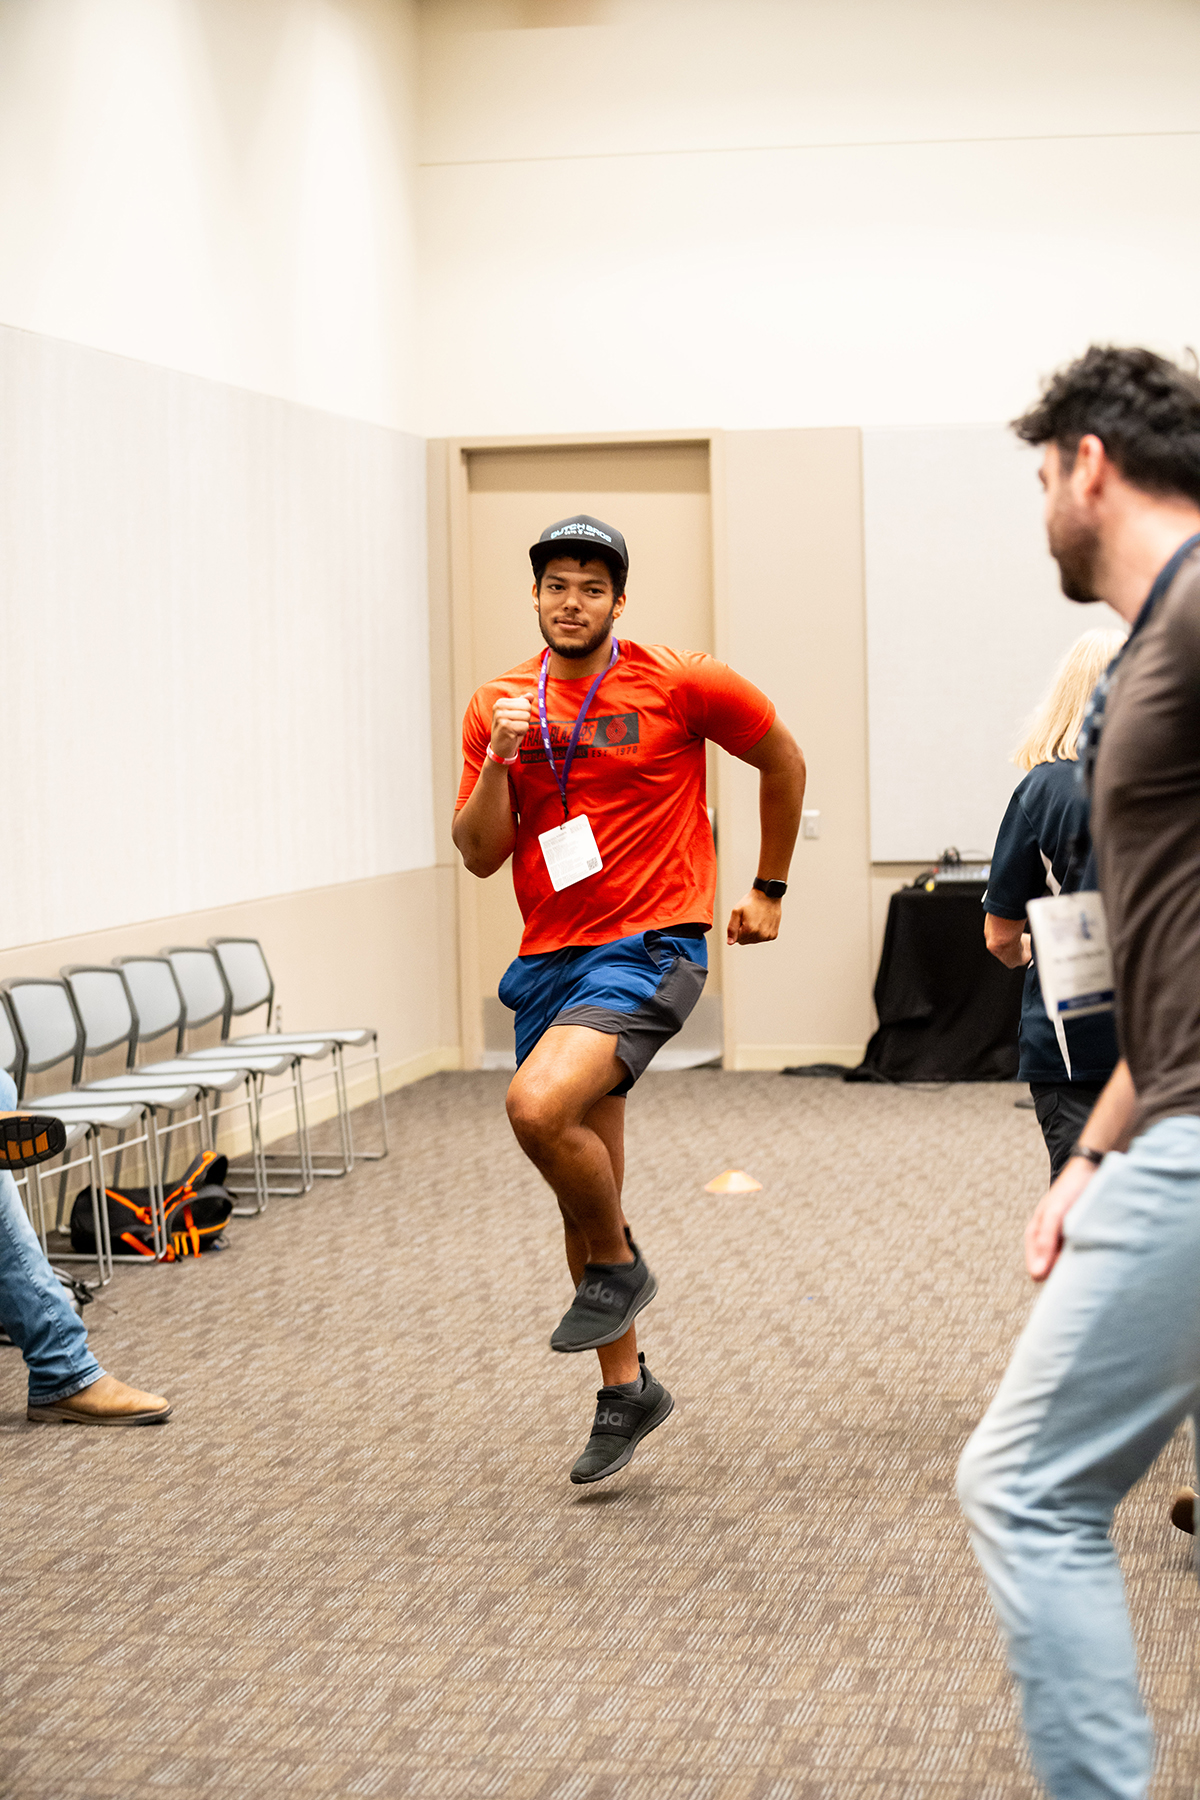 A young man is seen running in spot while another man watches during a class.